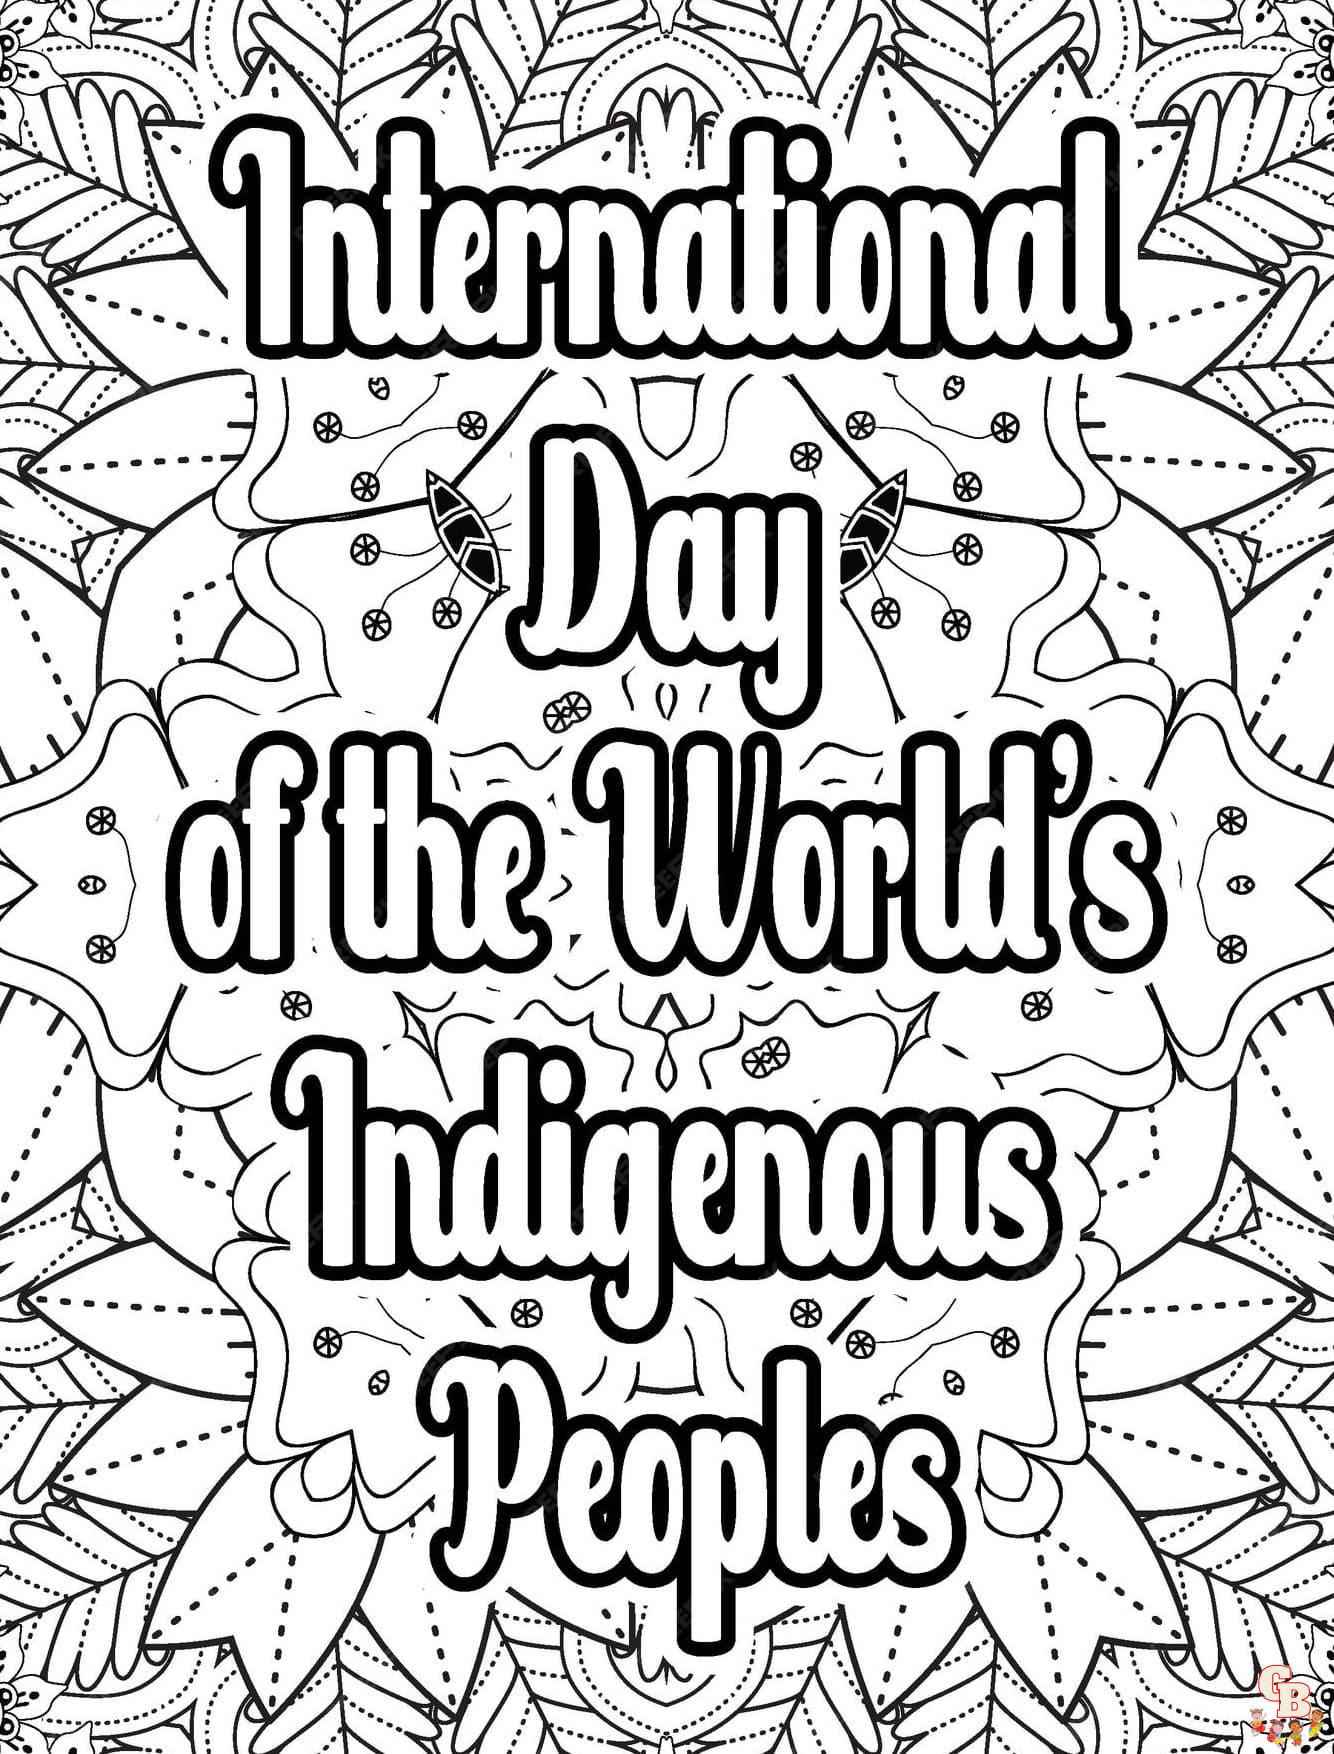 Indigenous Peoples' Day coloring pages free